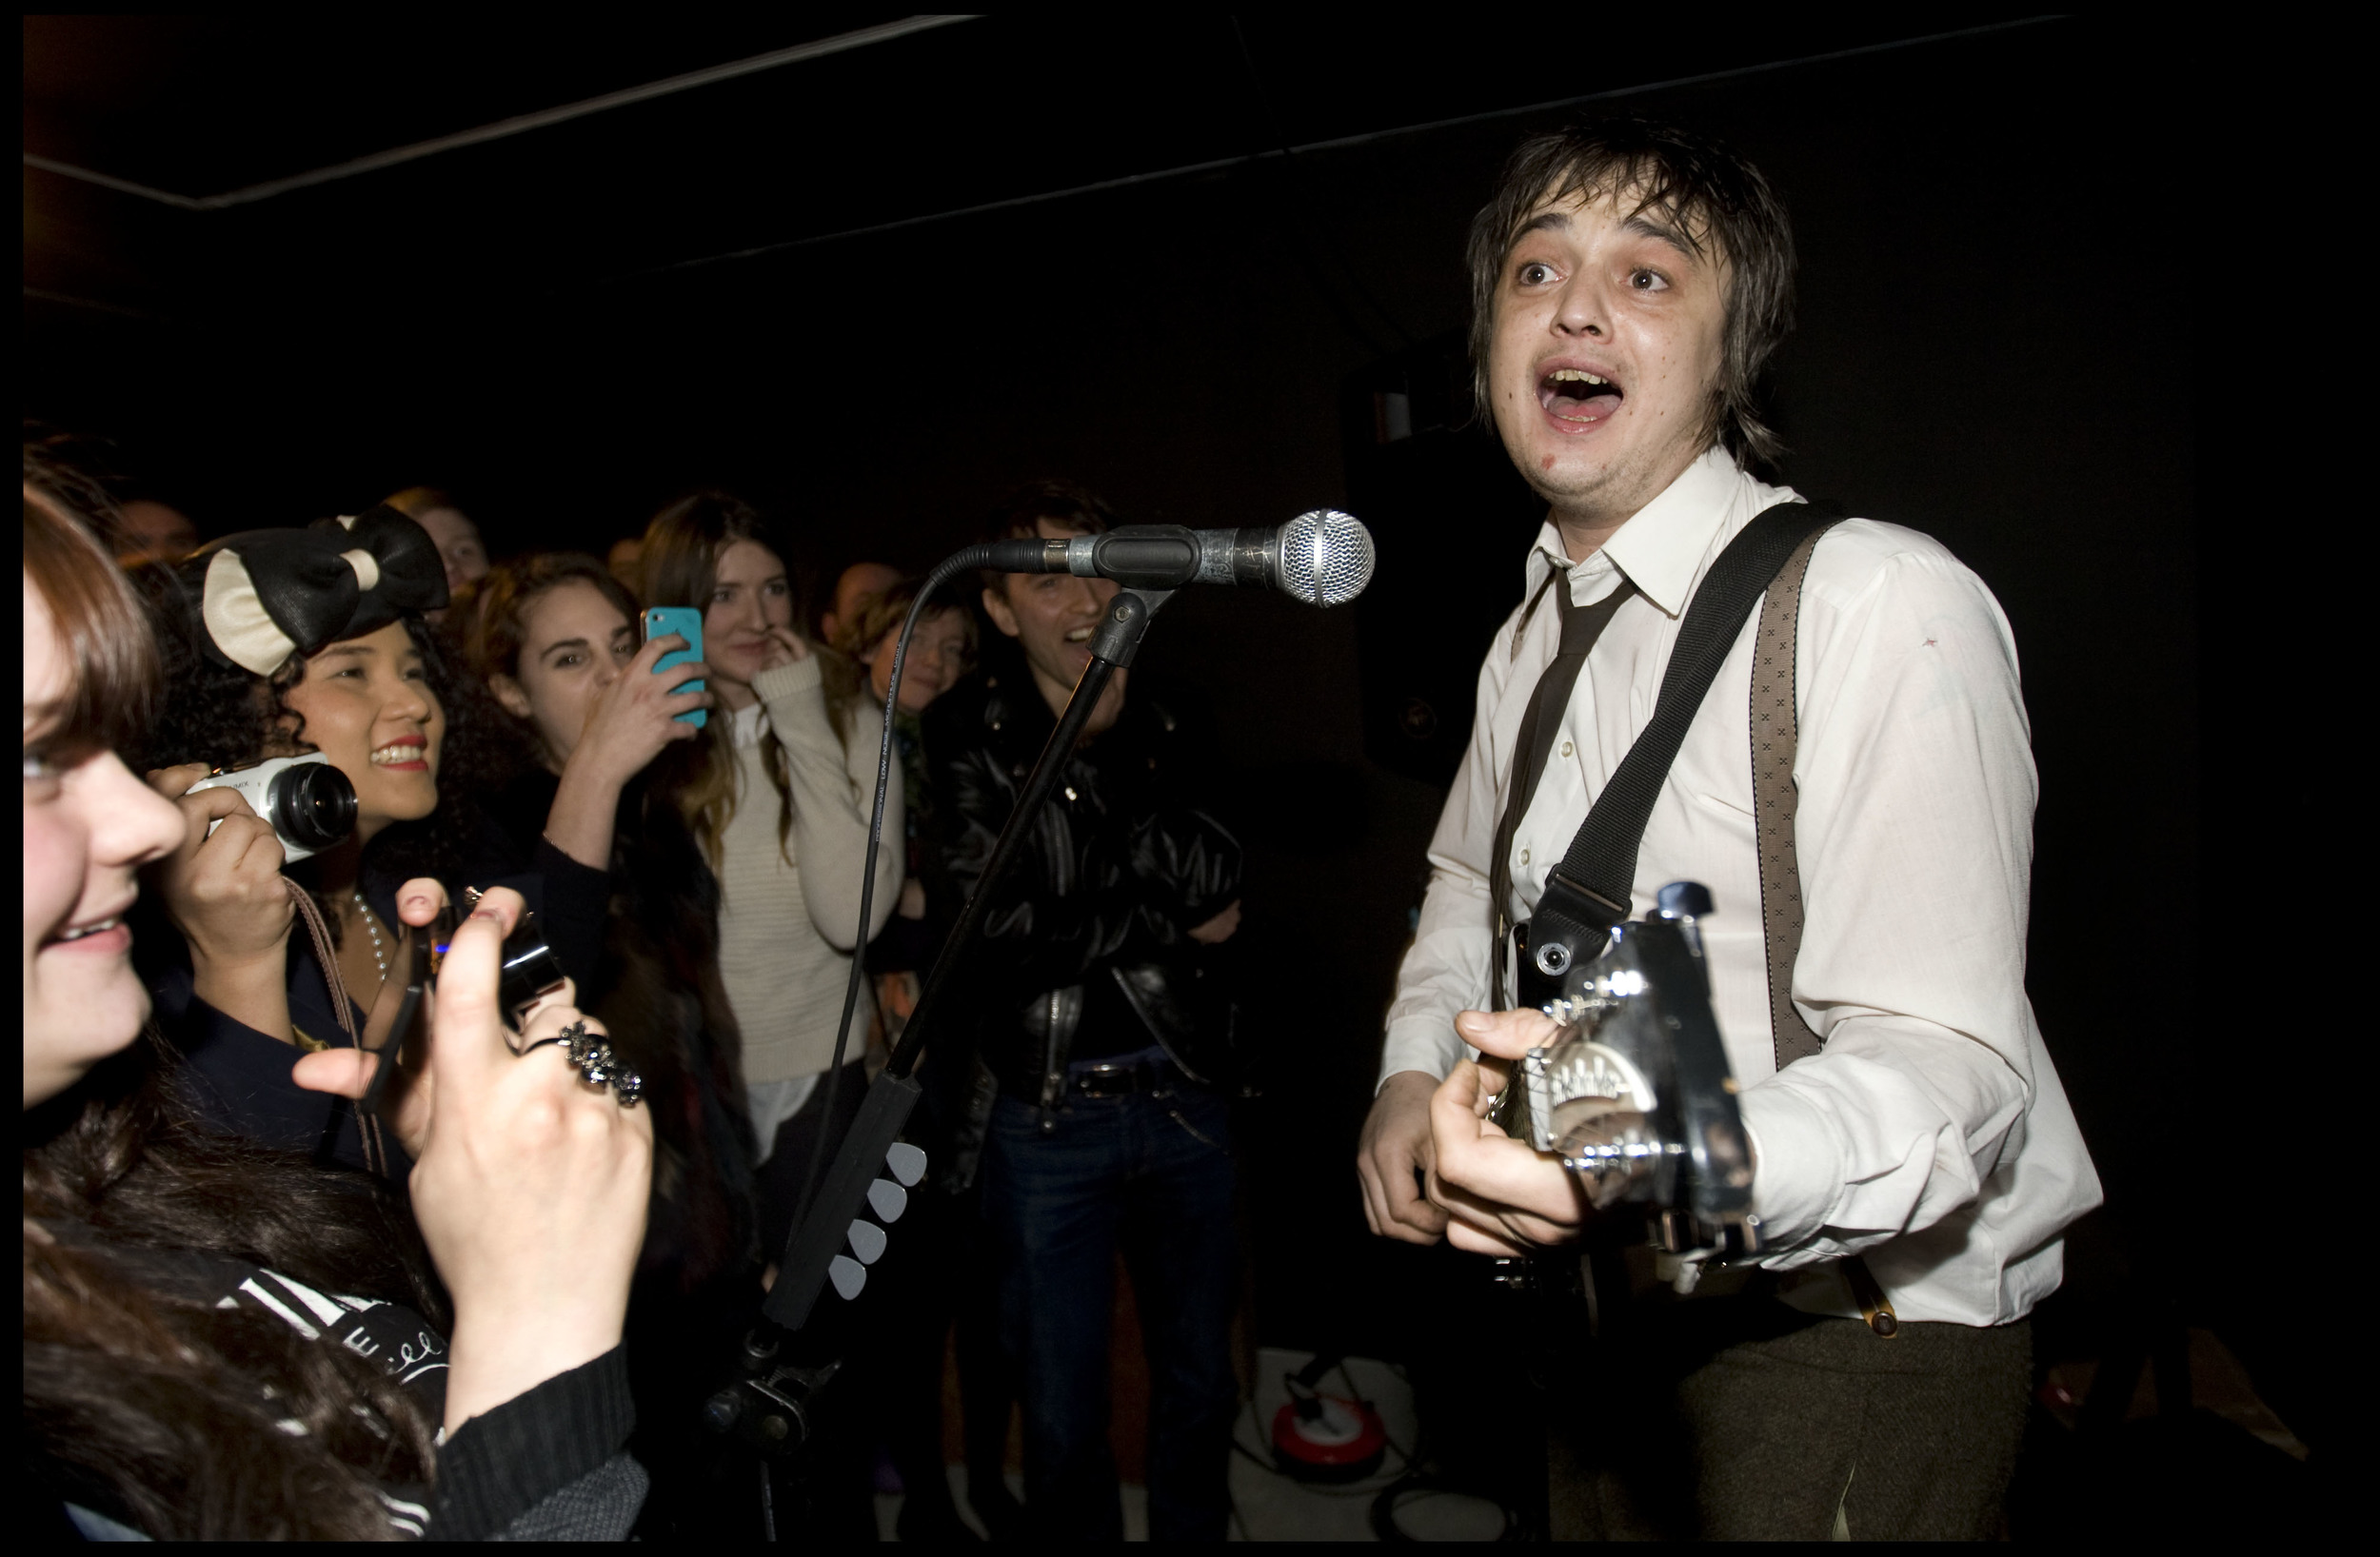 Pete Doherty plays at his art exhibition - Pete Doherty on blood